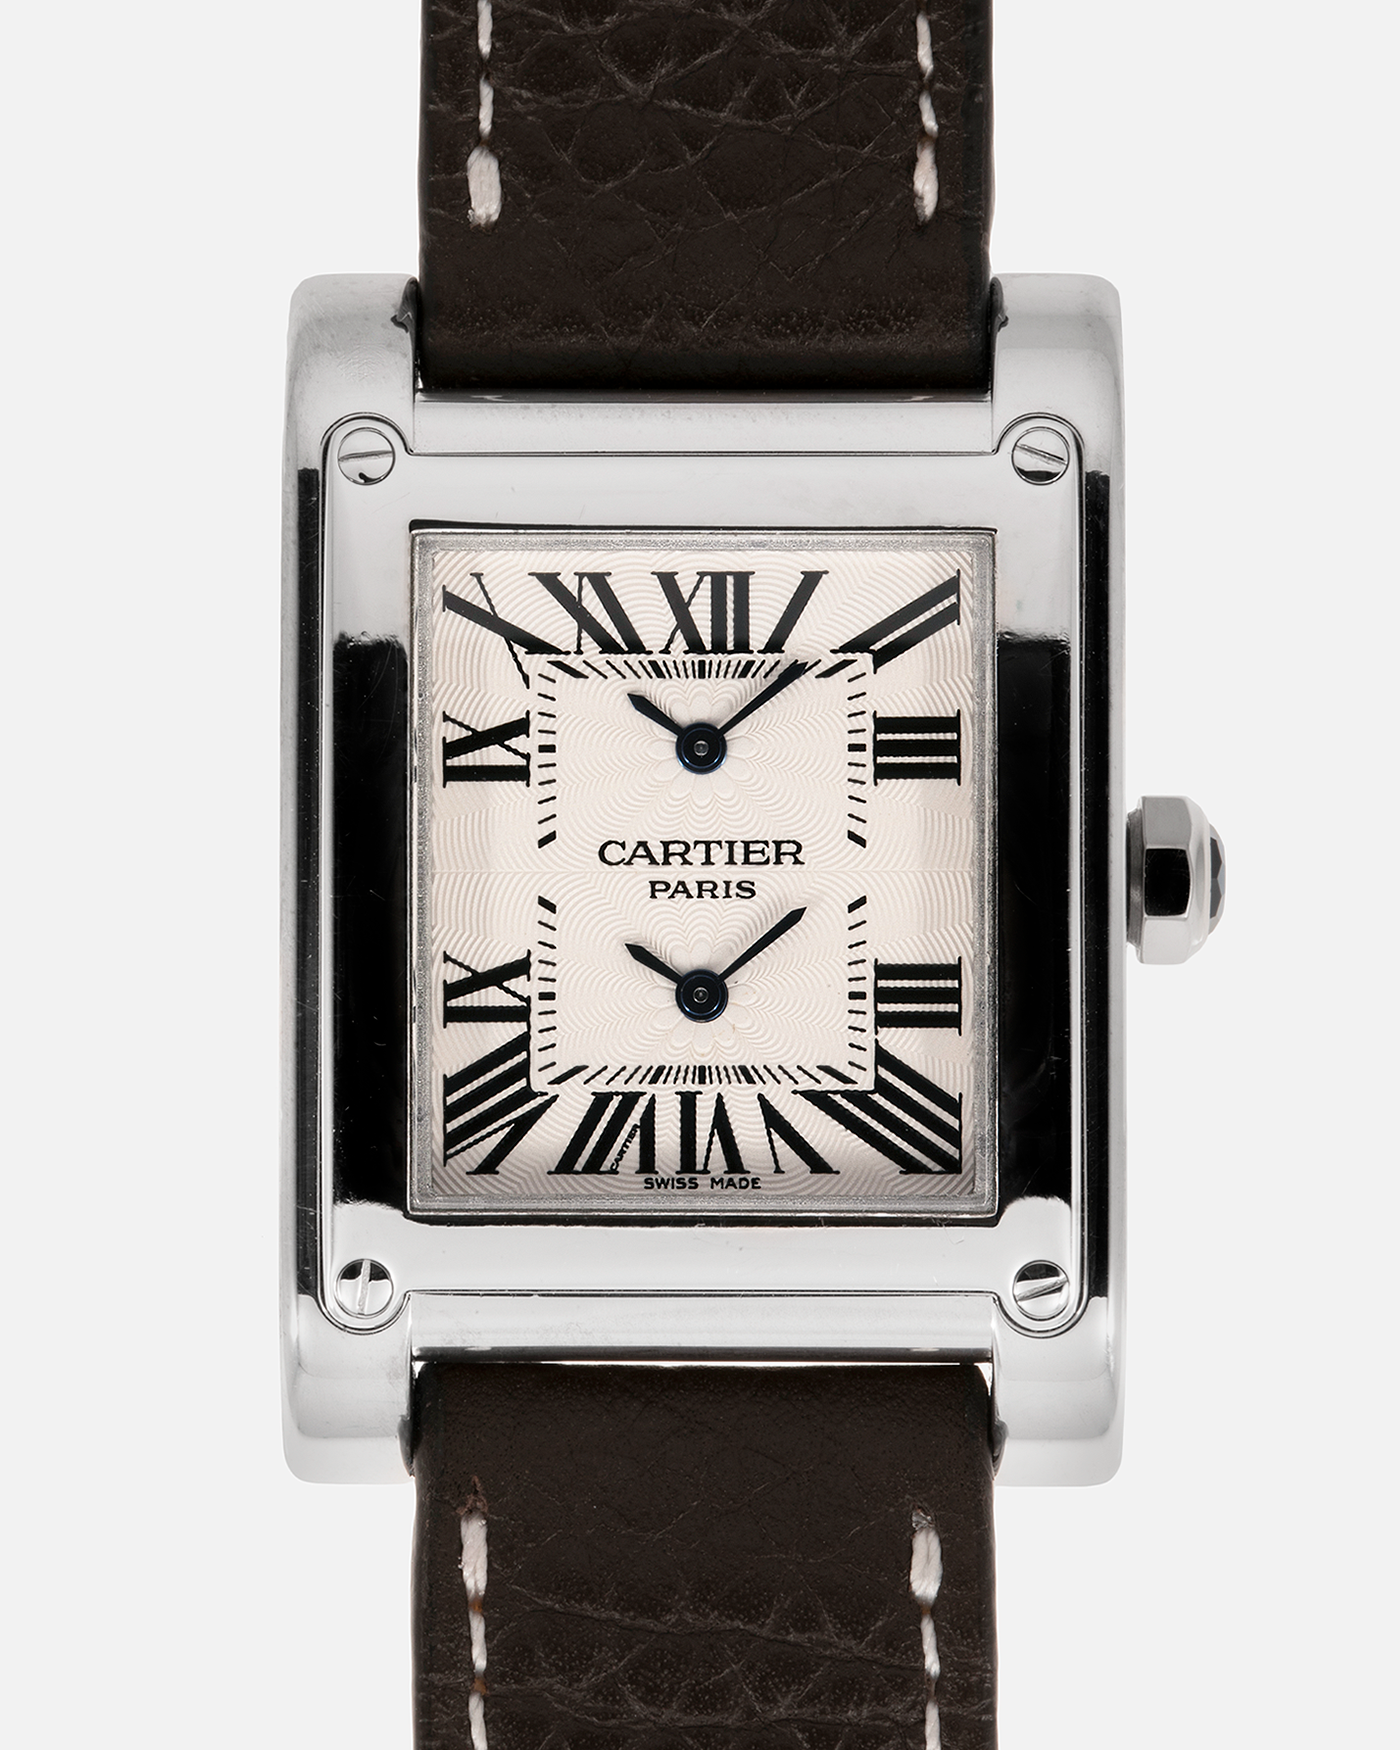 Brand: Cartier Year: 2000s Model: Tank à Vis Dual Time Reference: 2552 Material: 18-carat White Gold Movement: Piaget Ebauche Based Cal. 9901MC, Manual-Winding Case Diameter: 28mm x 32mm Strap: Subdial Dark Brown Textured Calf Leather Strap with Signed 18-carat White Gold Deployant Clasp